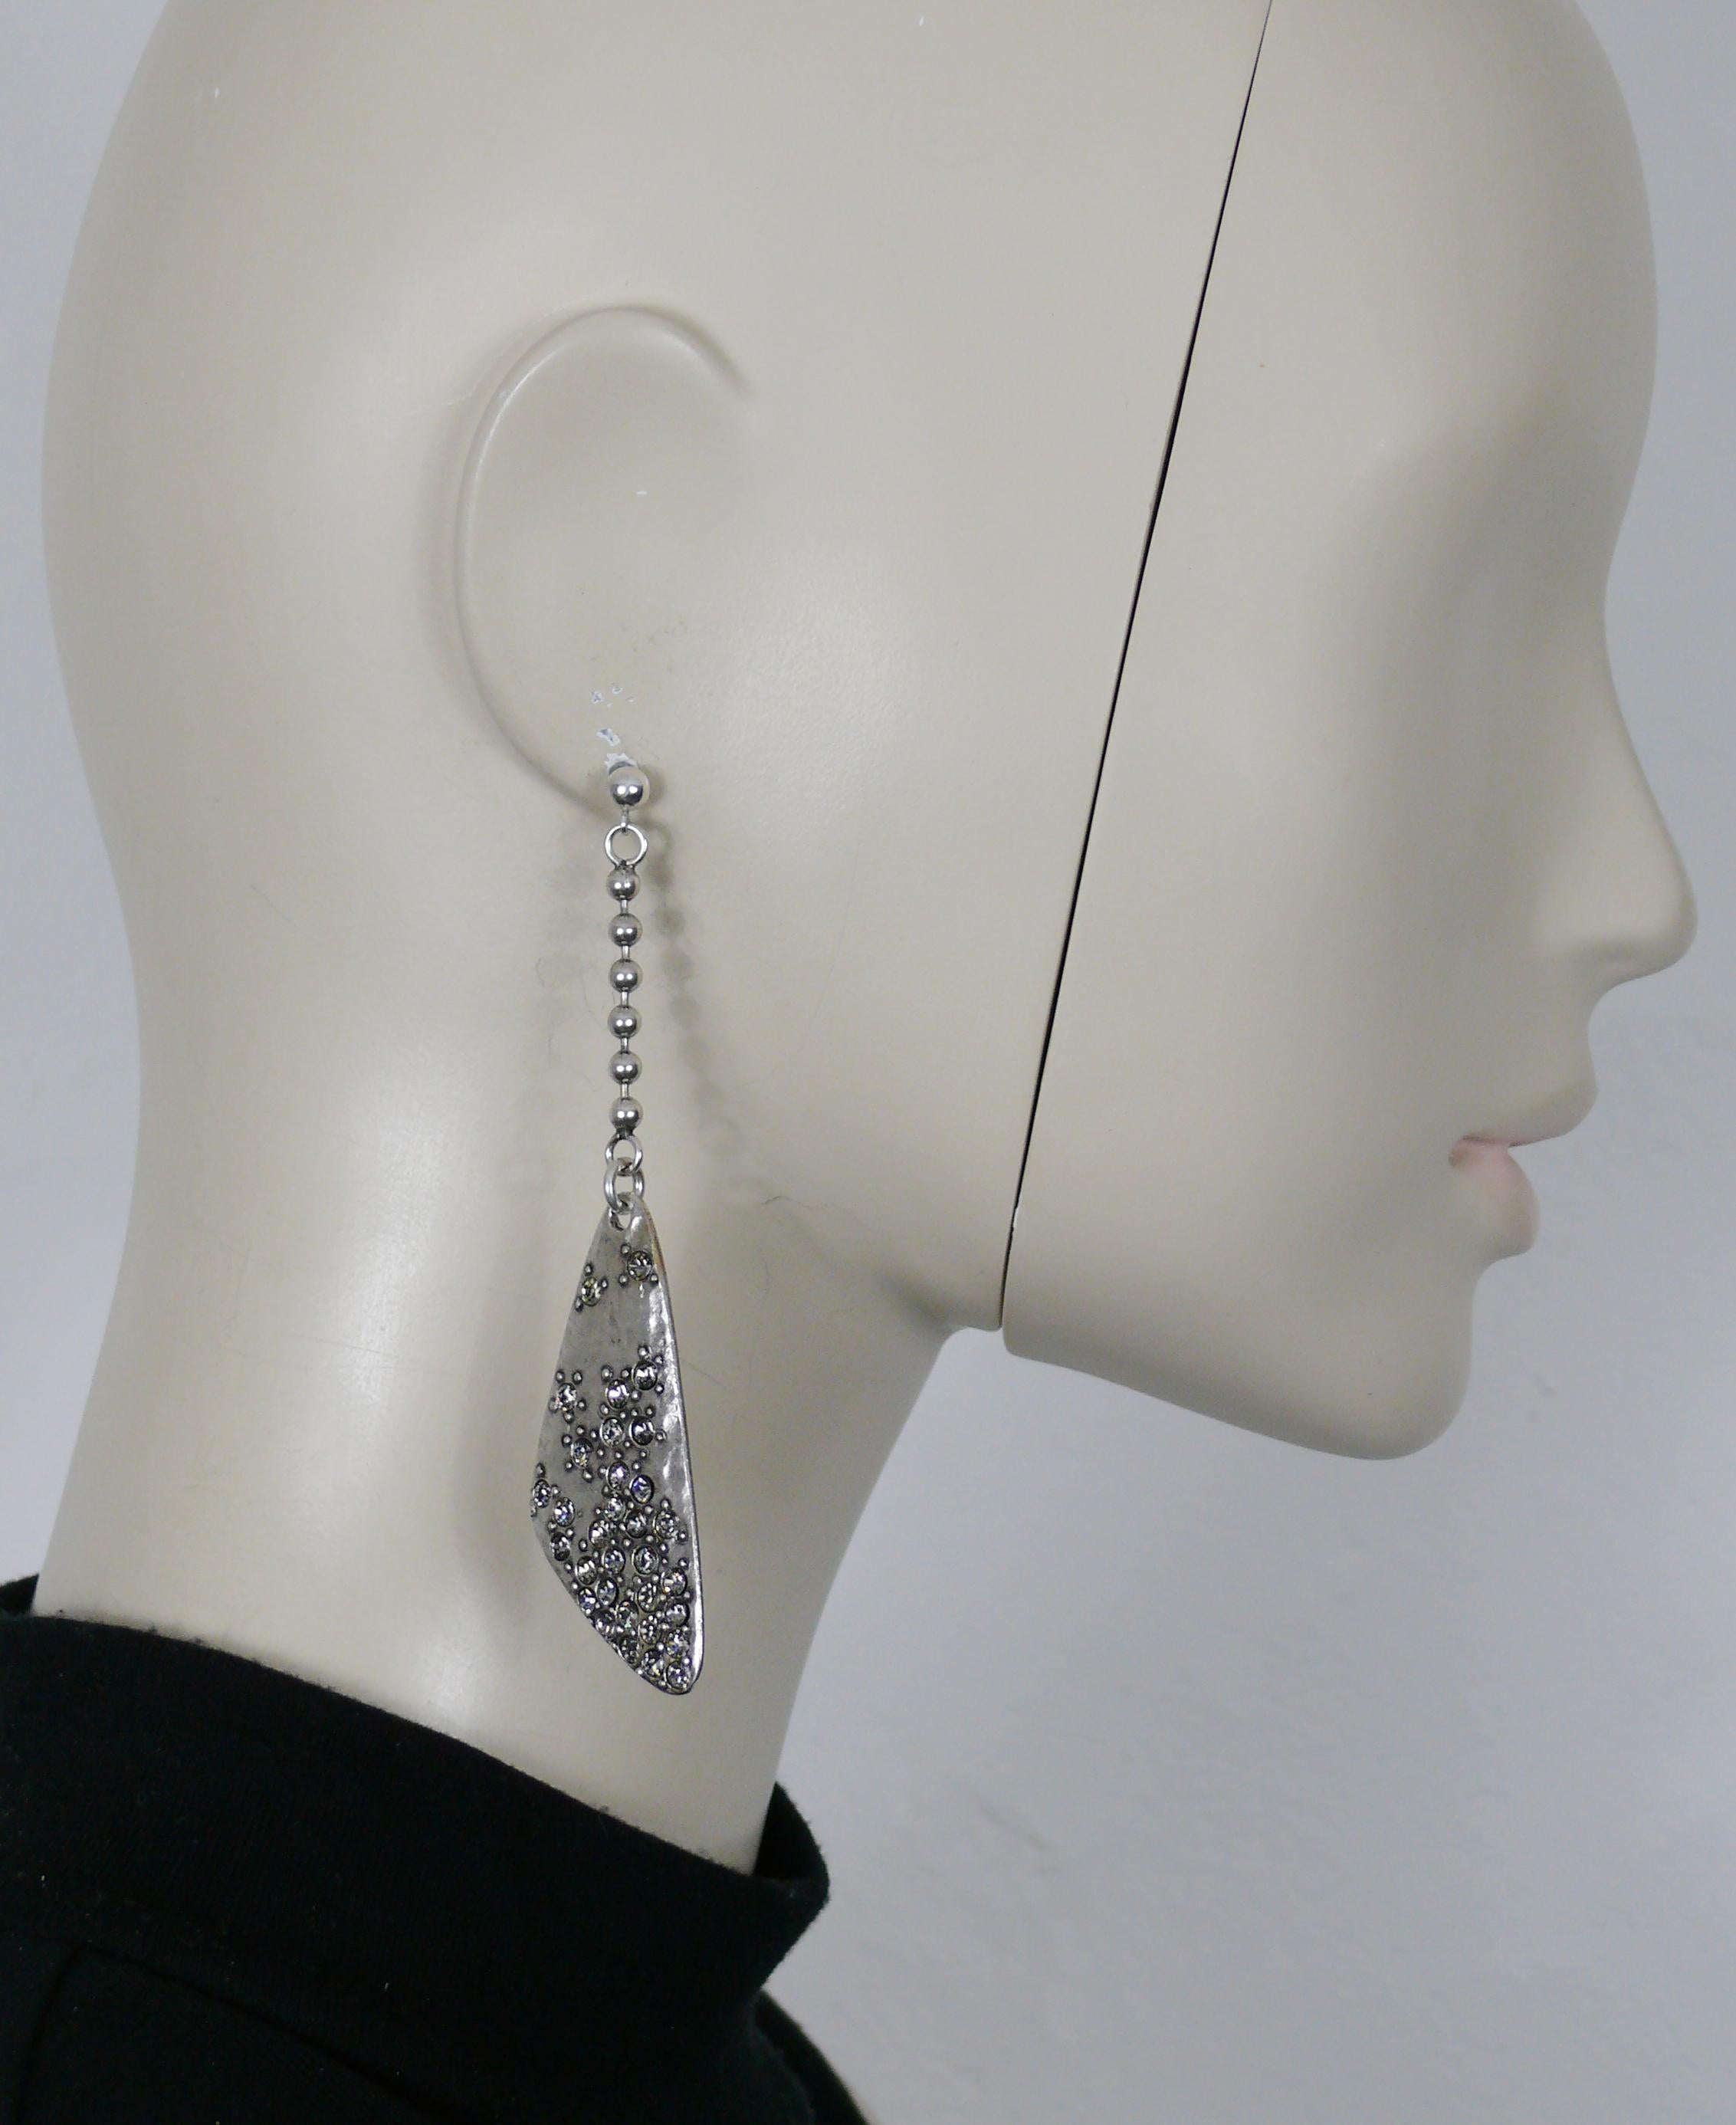 JEAN PAUL GAULTIER vintage antiqued silver tone dangling earrings (for pierced ears - stud earrings).

Marked GAULTIER.

Indicative measurements : max. height approx. 10 cm (3.94 inches) / max. width approx. 2.4 cm (0.94 inch).

Weight per earring :